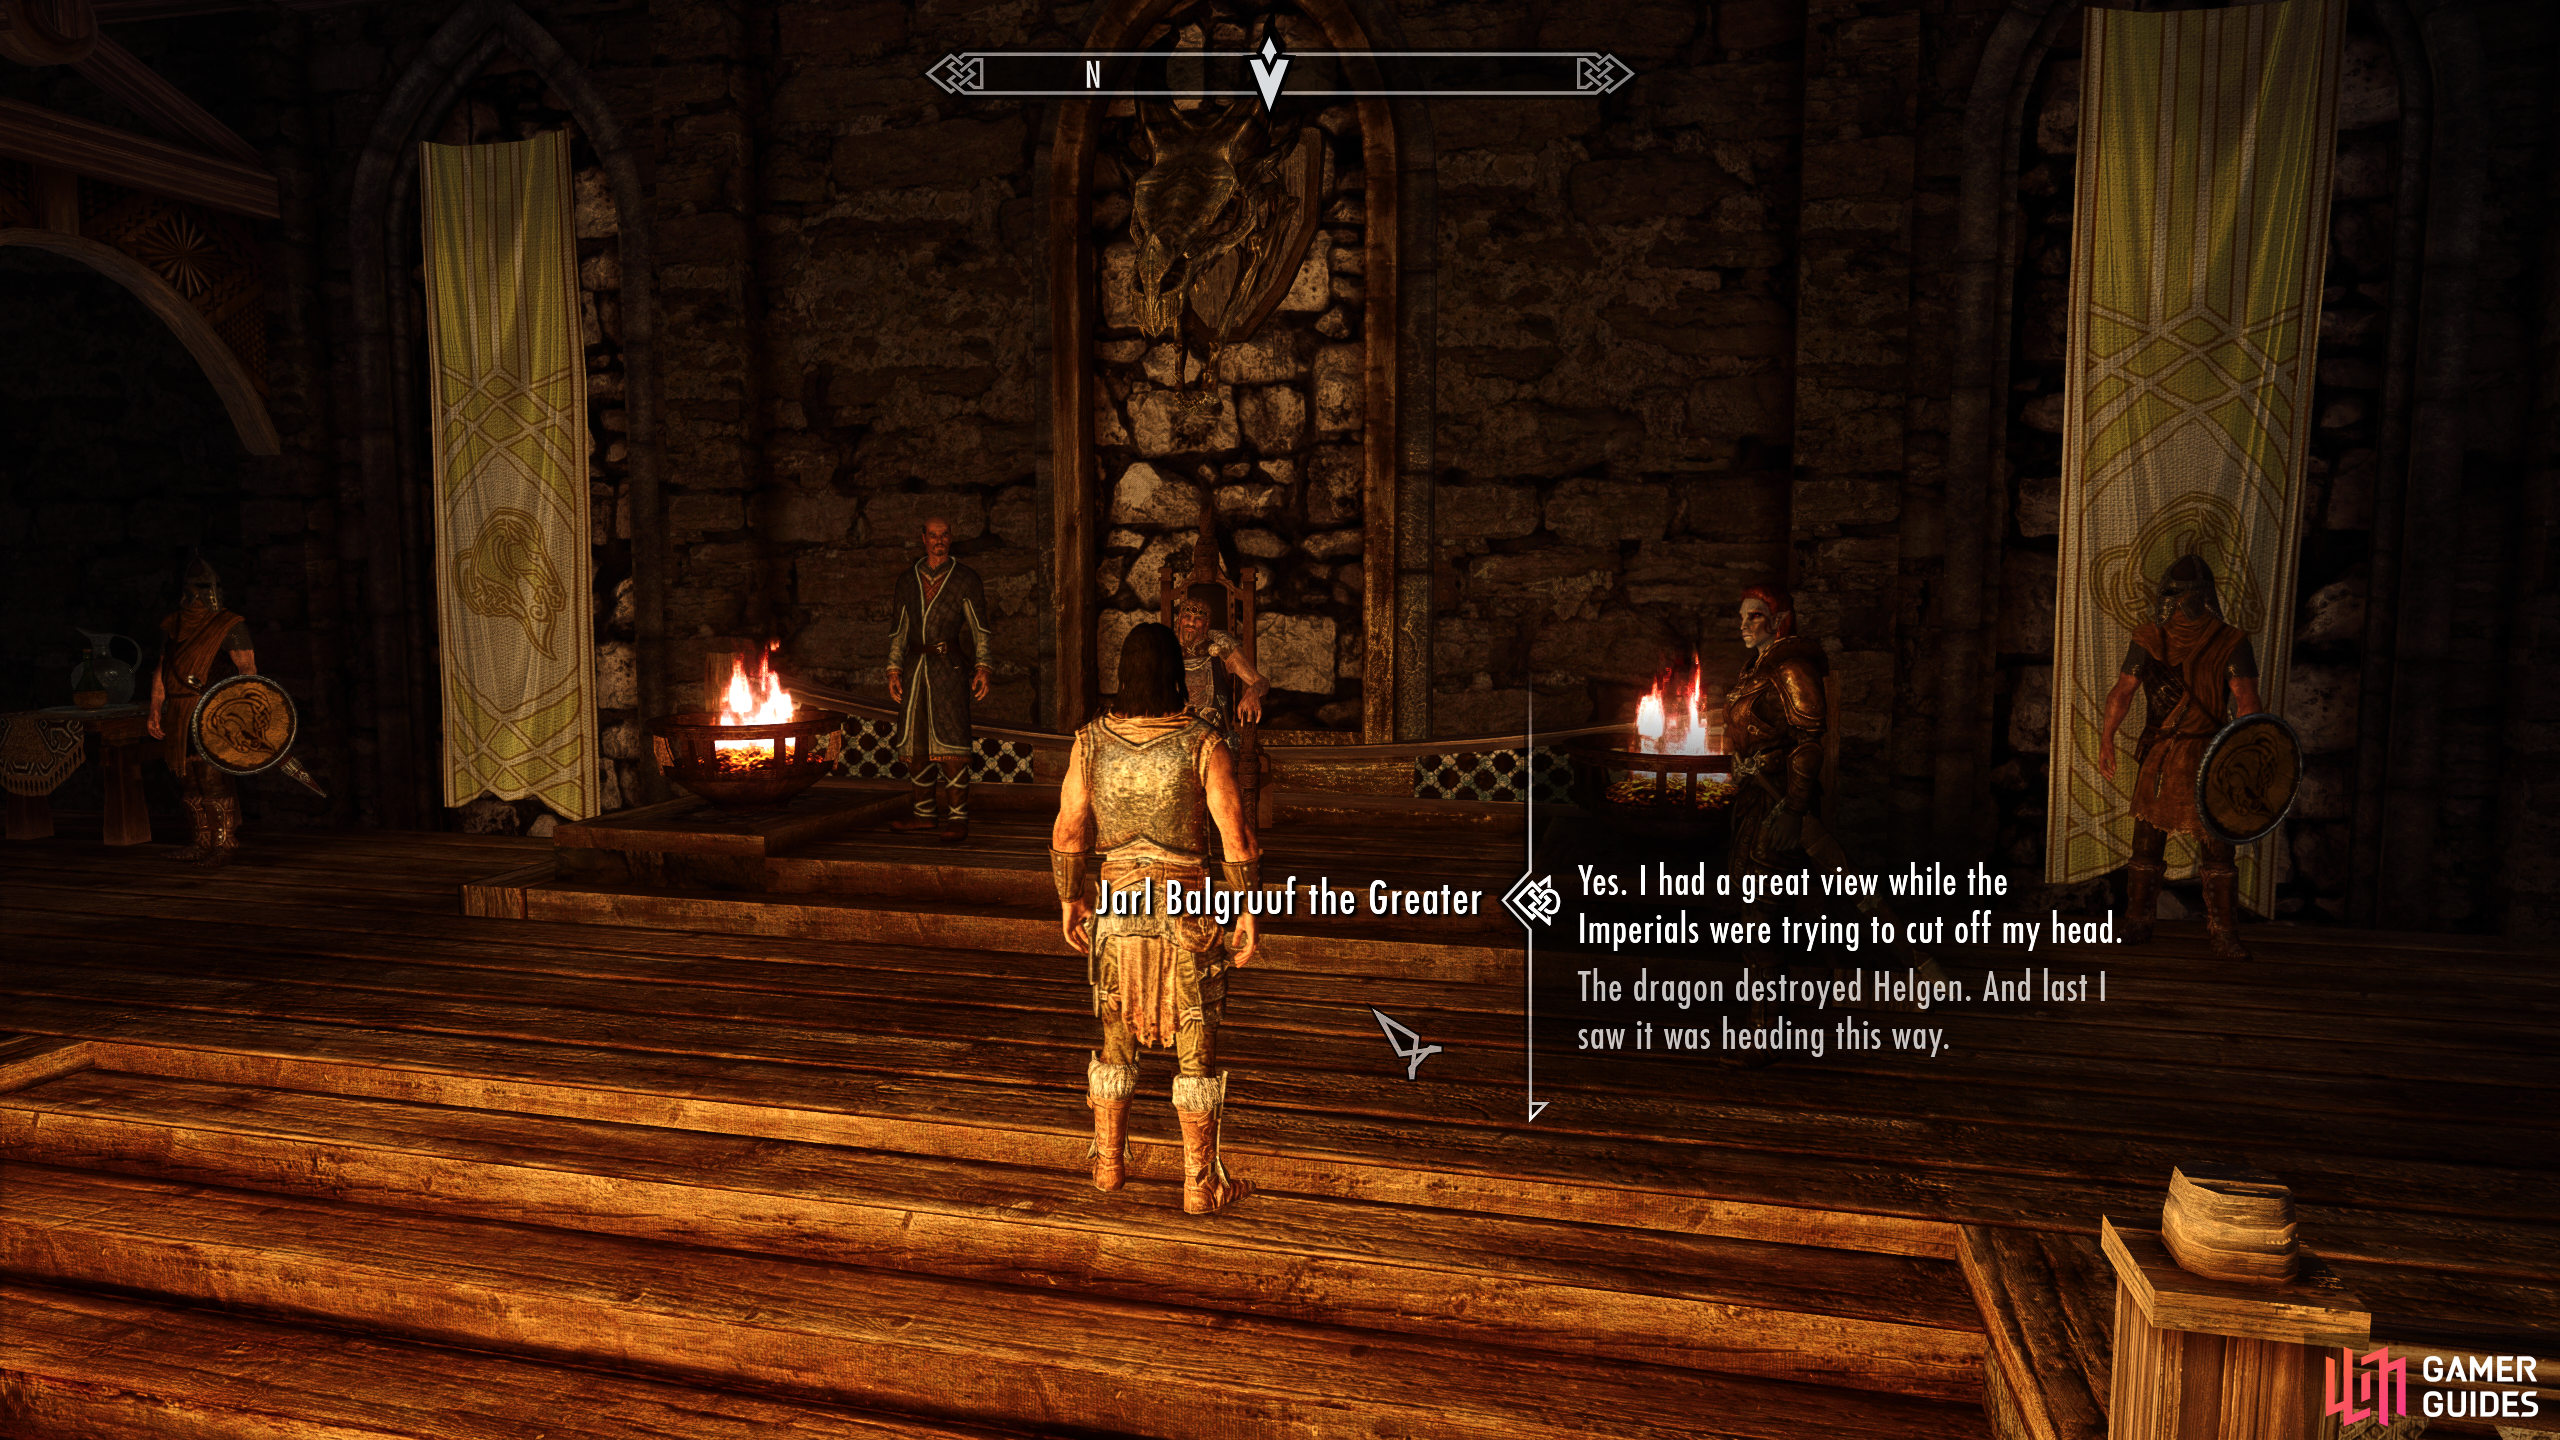 Speak with Jarl Balgruuf in Dragonsreach Keep at Whiterun to complete the quest.